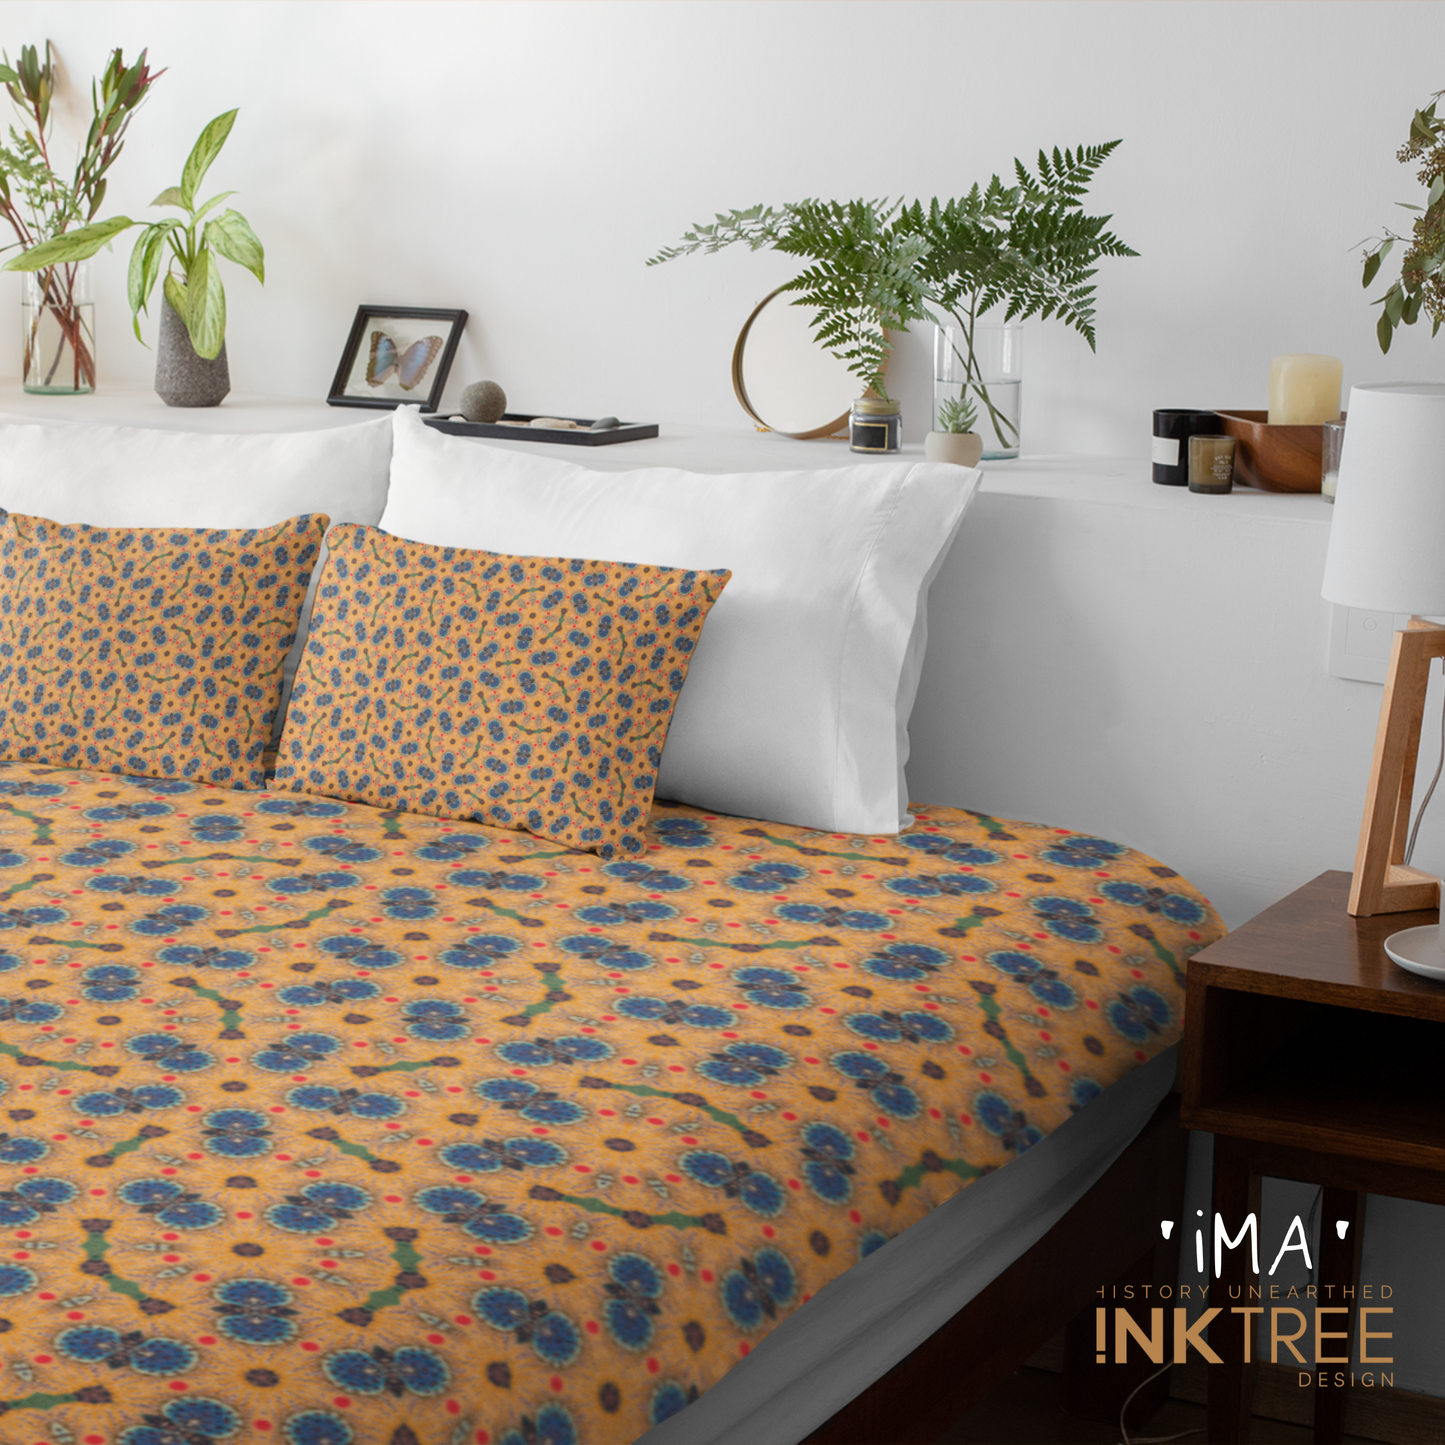 A quilt or doona cover and front pillows with a gold, black, blue, red, green and white oriental looking pattern on a bed with a white wall, white pillows and white backboard background. There is a lamp with a white shade and wood base and plants and a small round metal mirror on the back board. There is also a ima, history unearthed ink tree design logo in the bottom right hand corner on it.